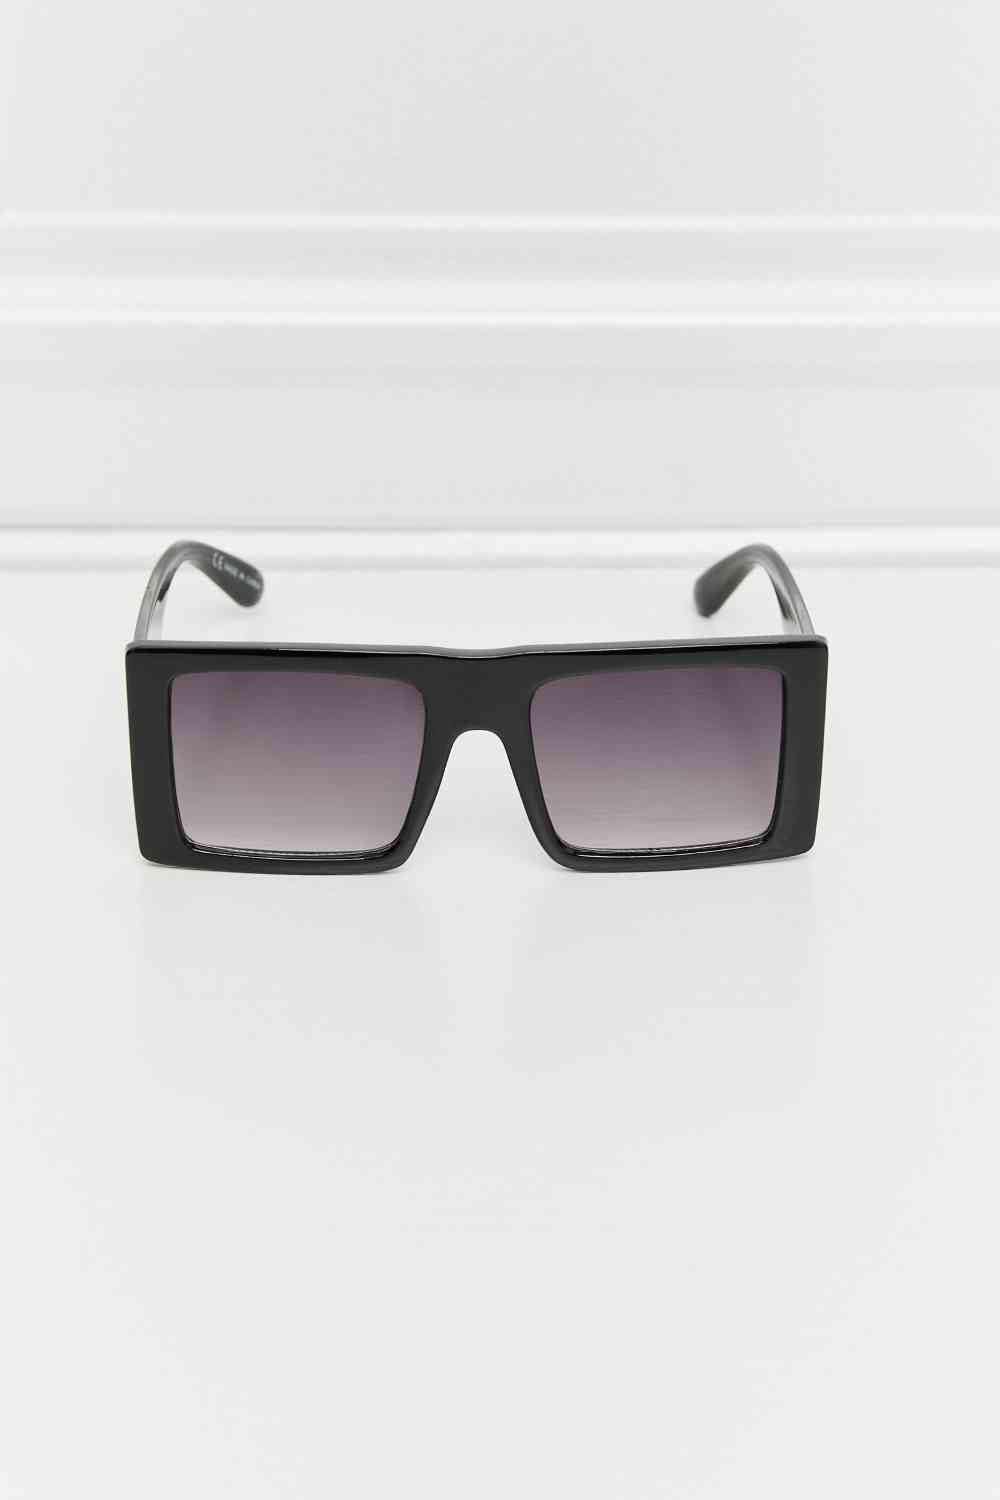 Square Polycarbonate Sunglasses Print on any thing USA/STOD clothes